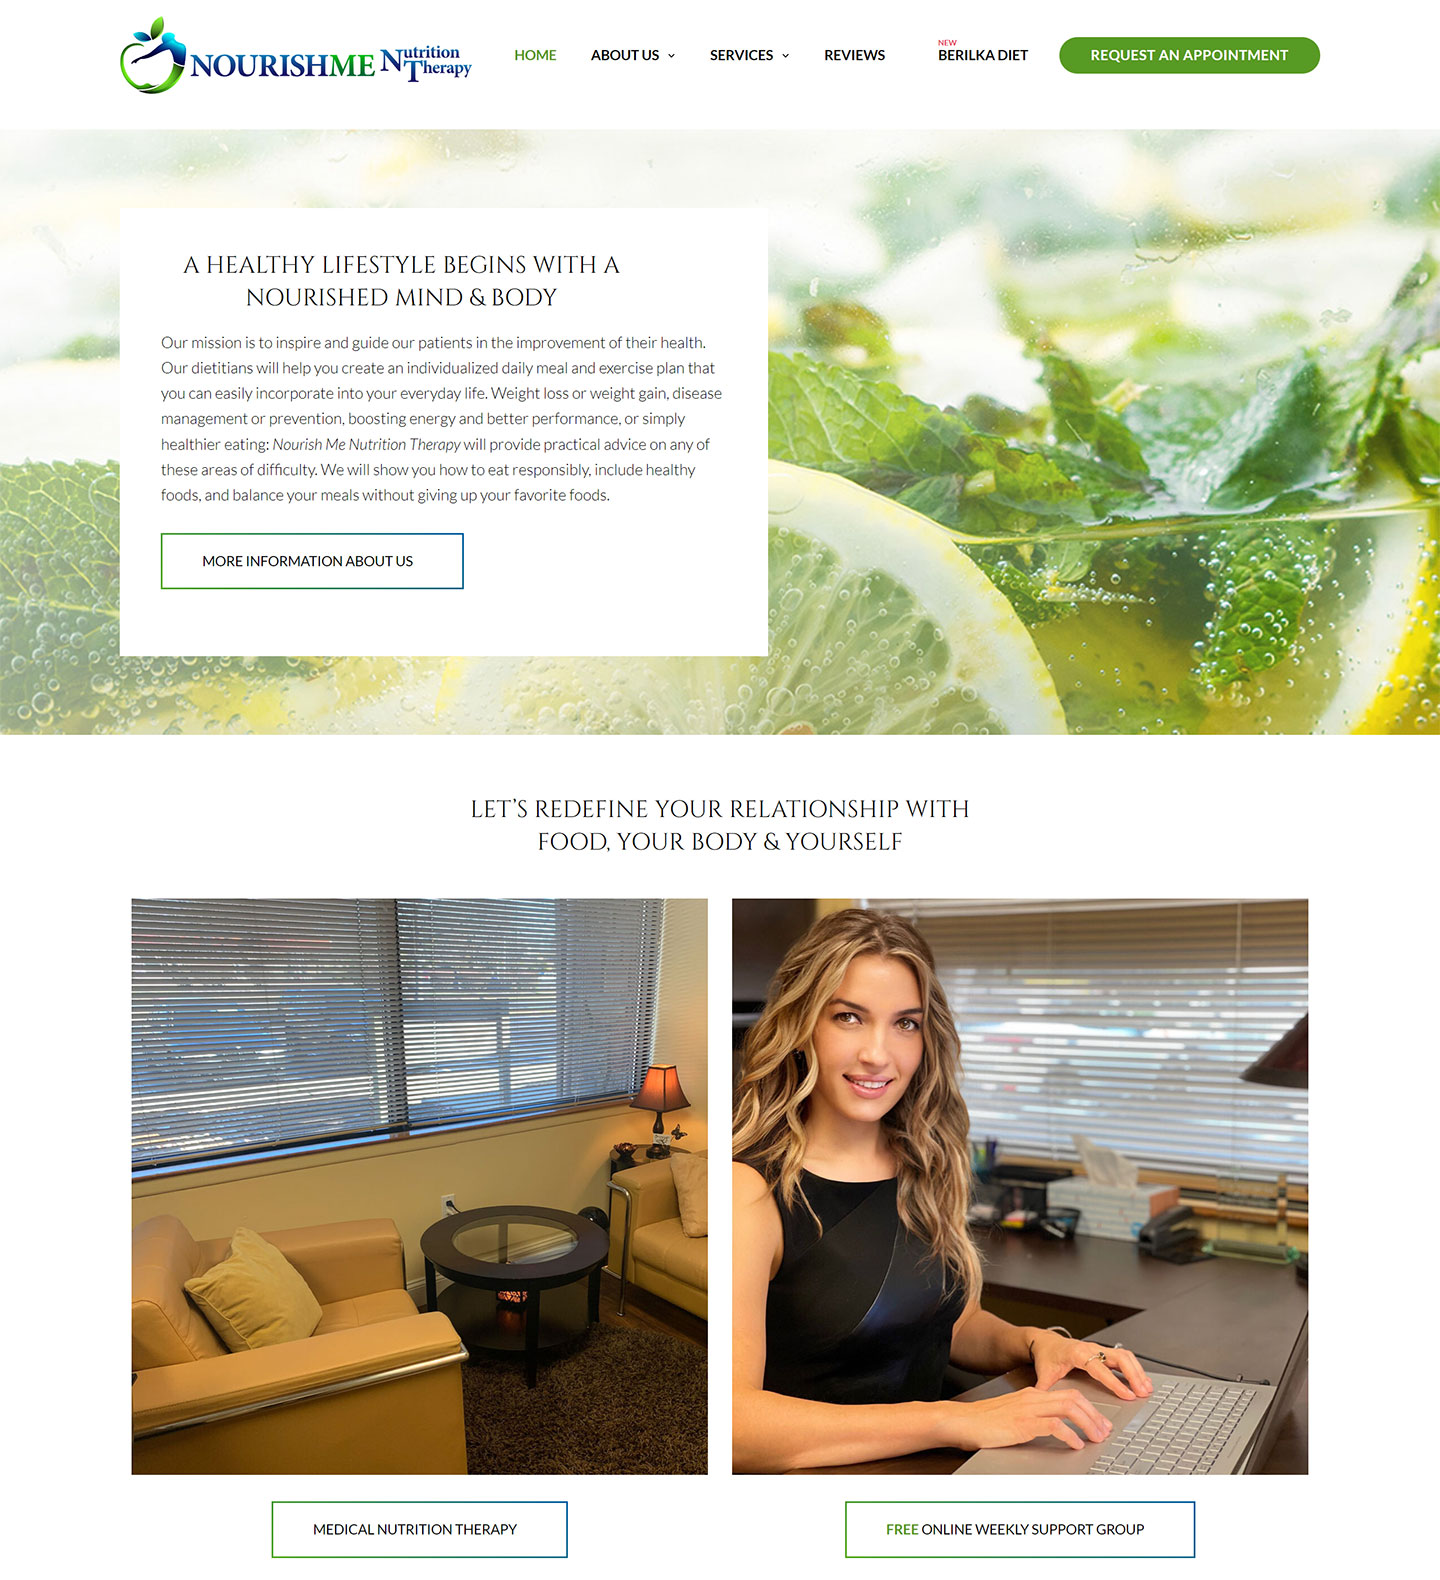 Website Redesign for Nourish Me Nutrition Therapy